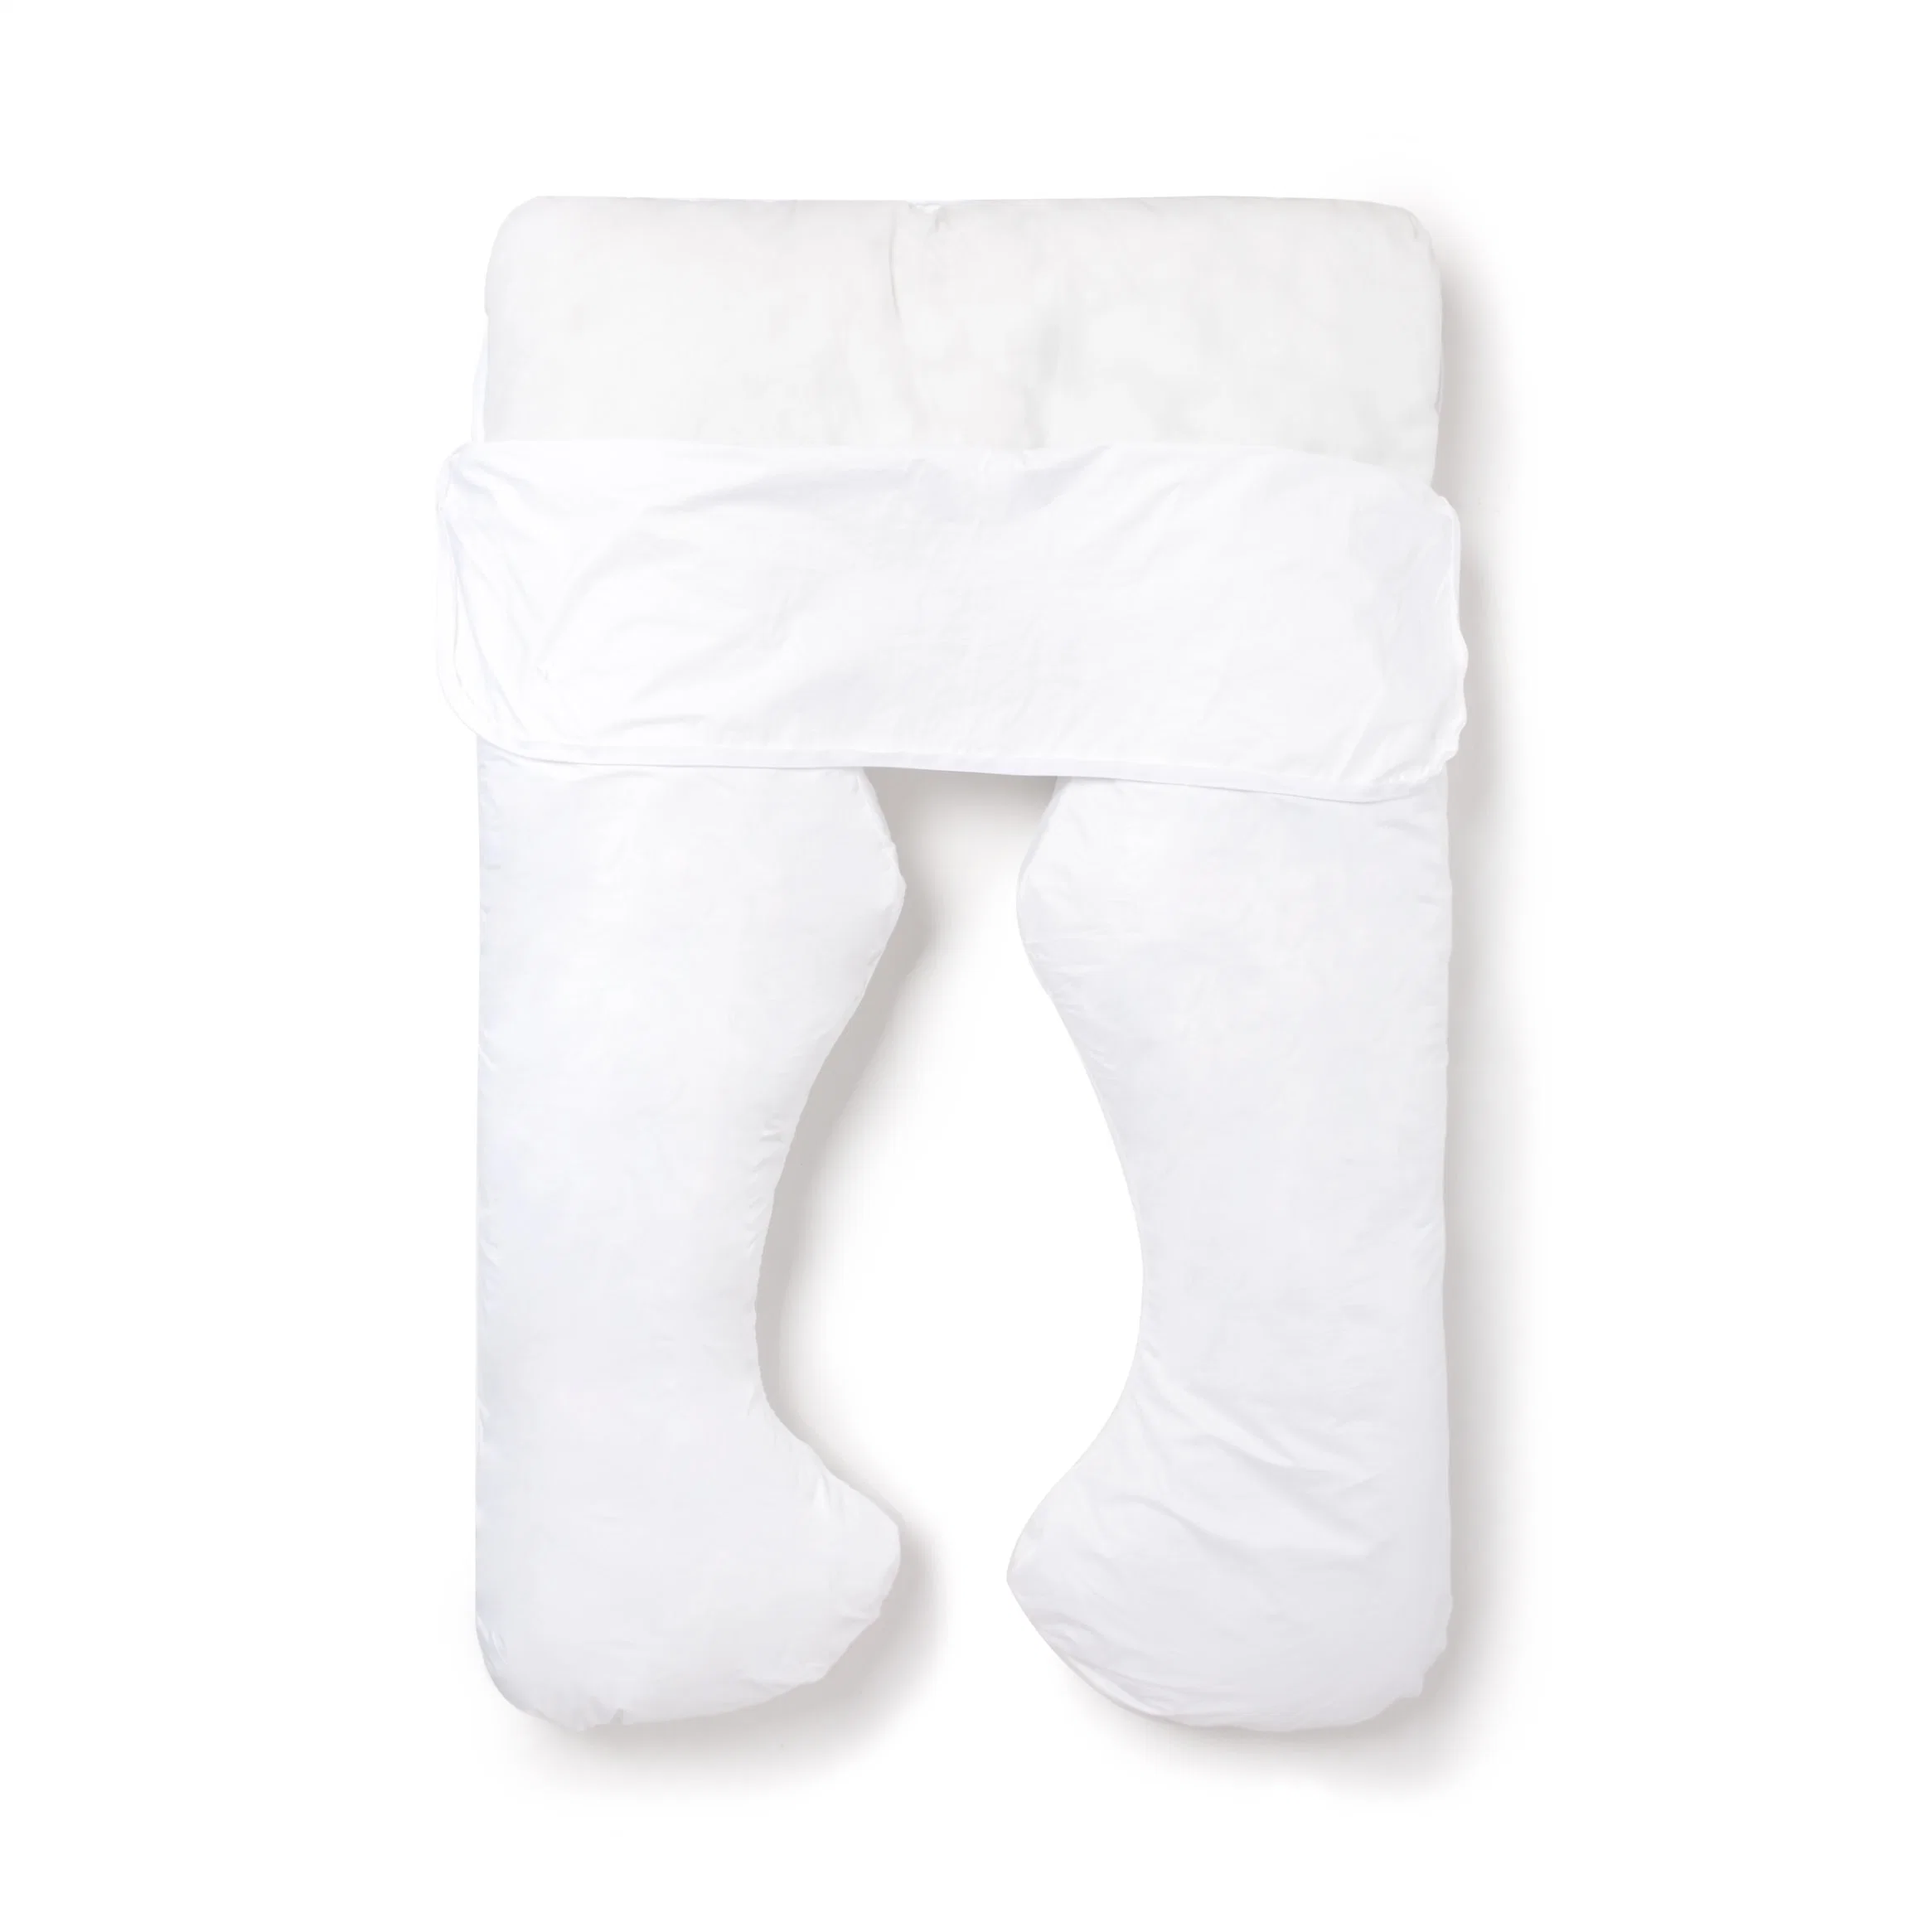 59" U Shaped Full Body Pillow for Maternity Support